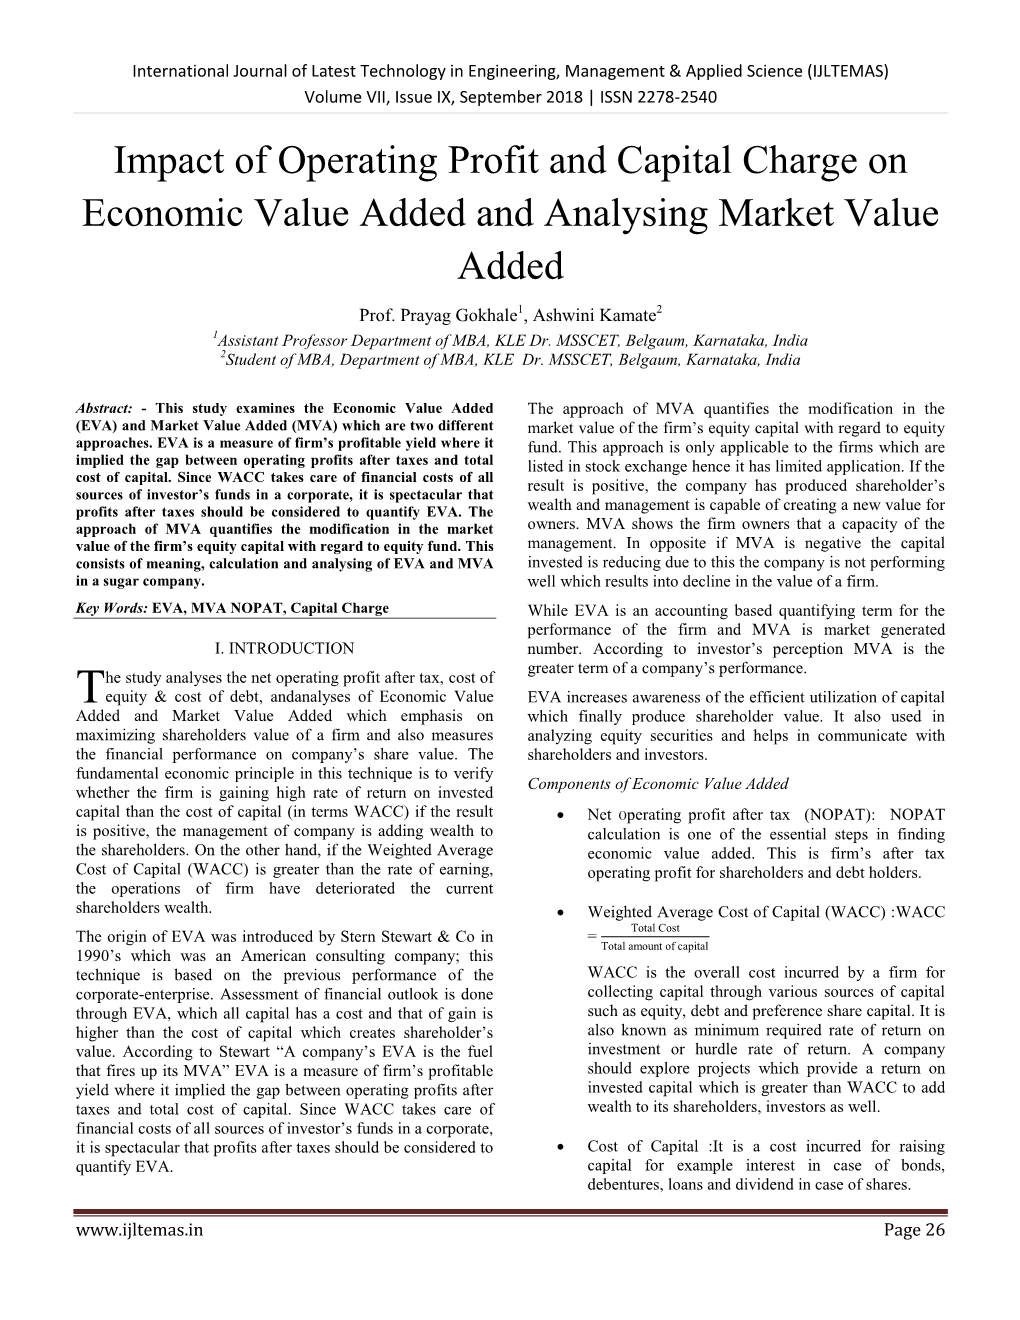 Impact of Operating Profit and Capital Charge on Economic Value Added and Analysing Market Value Added